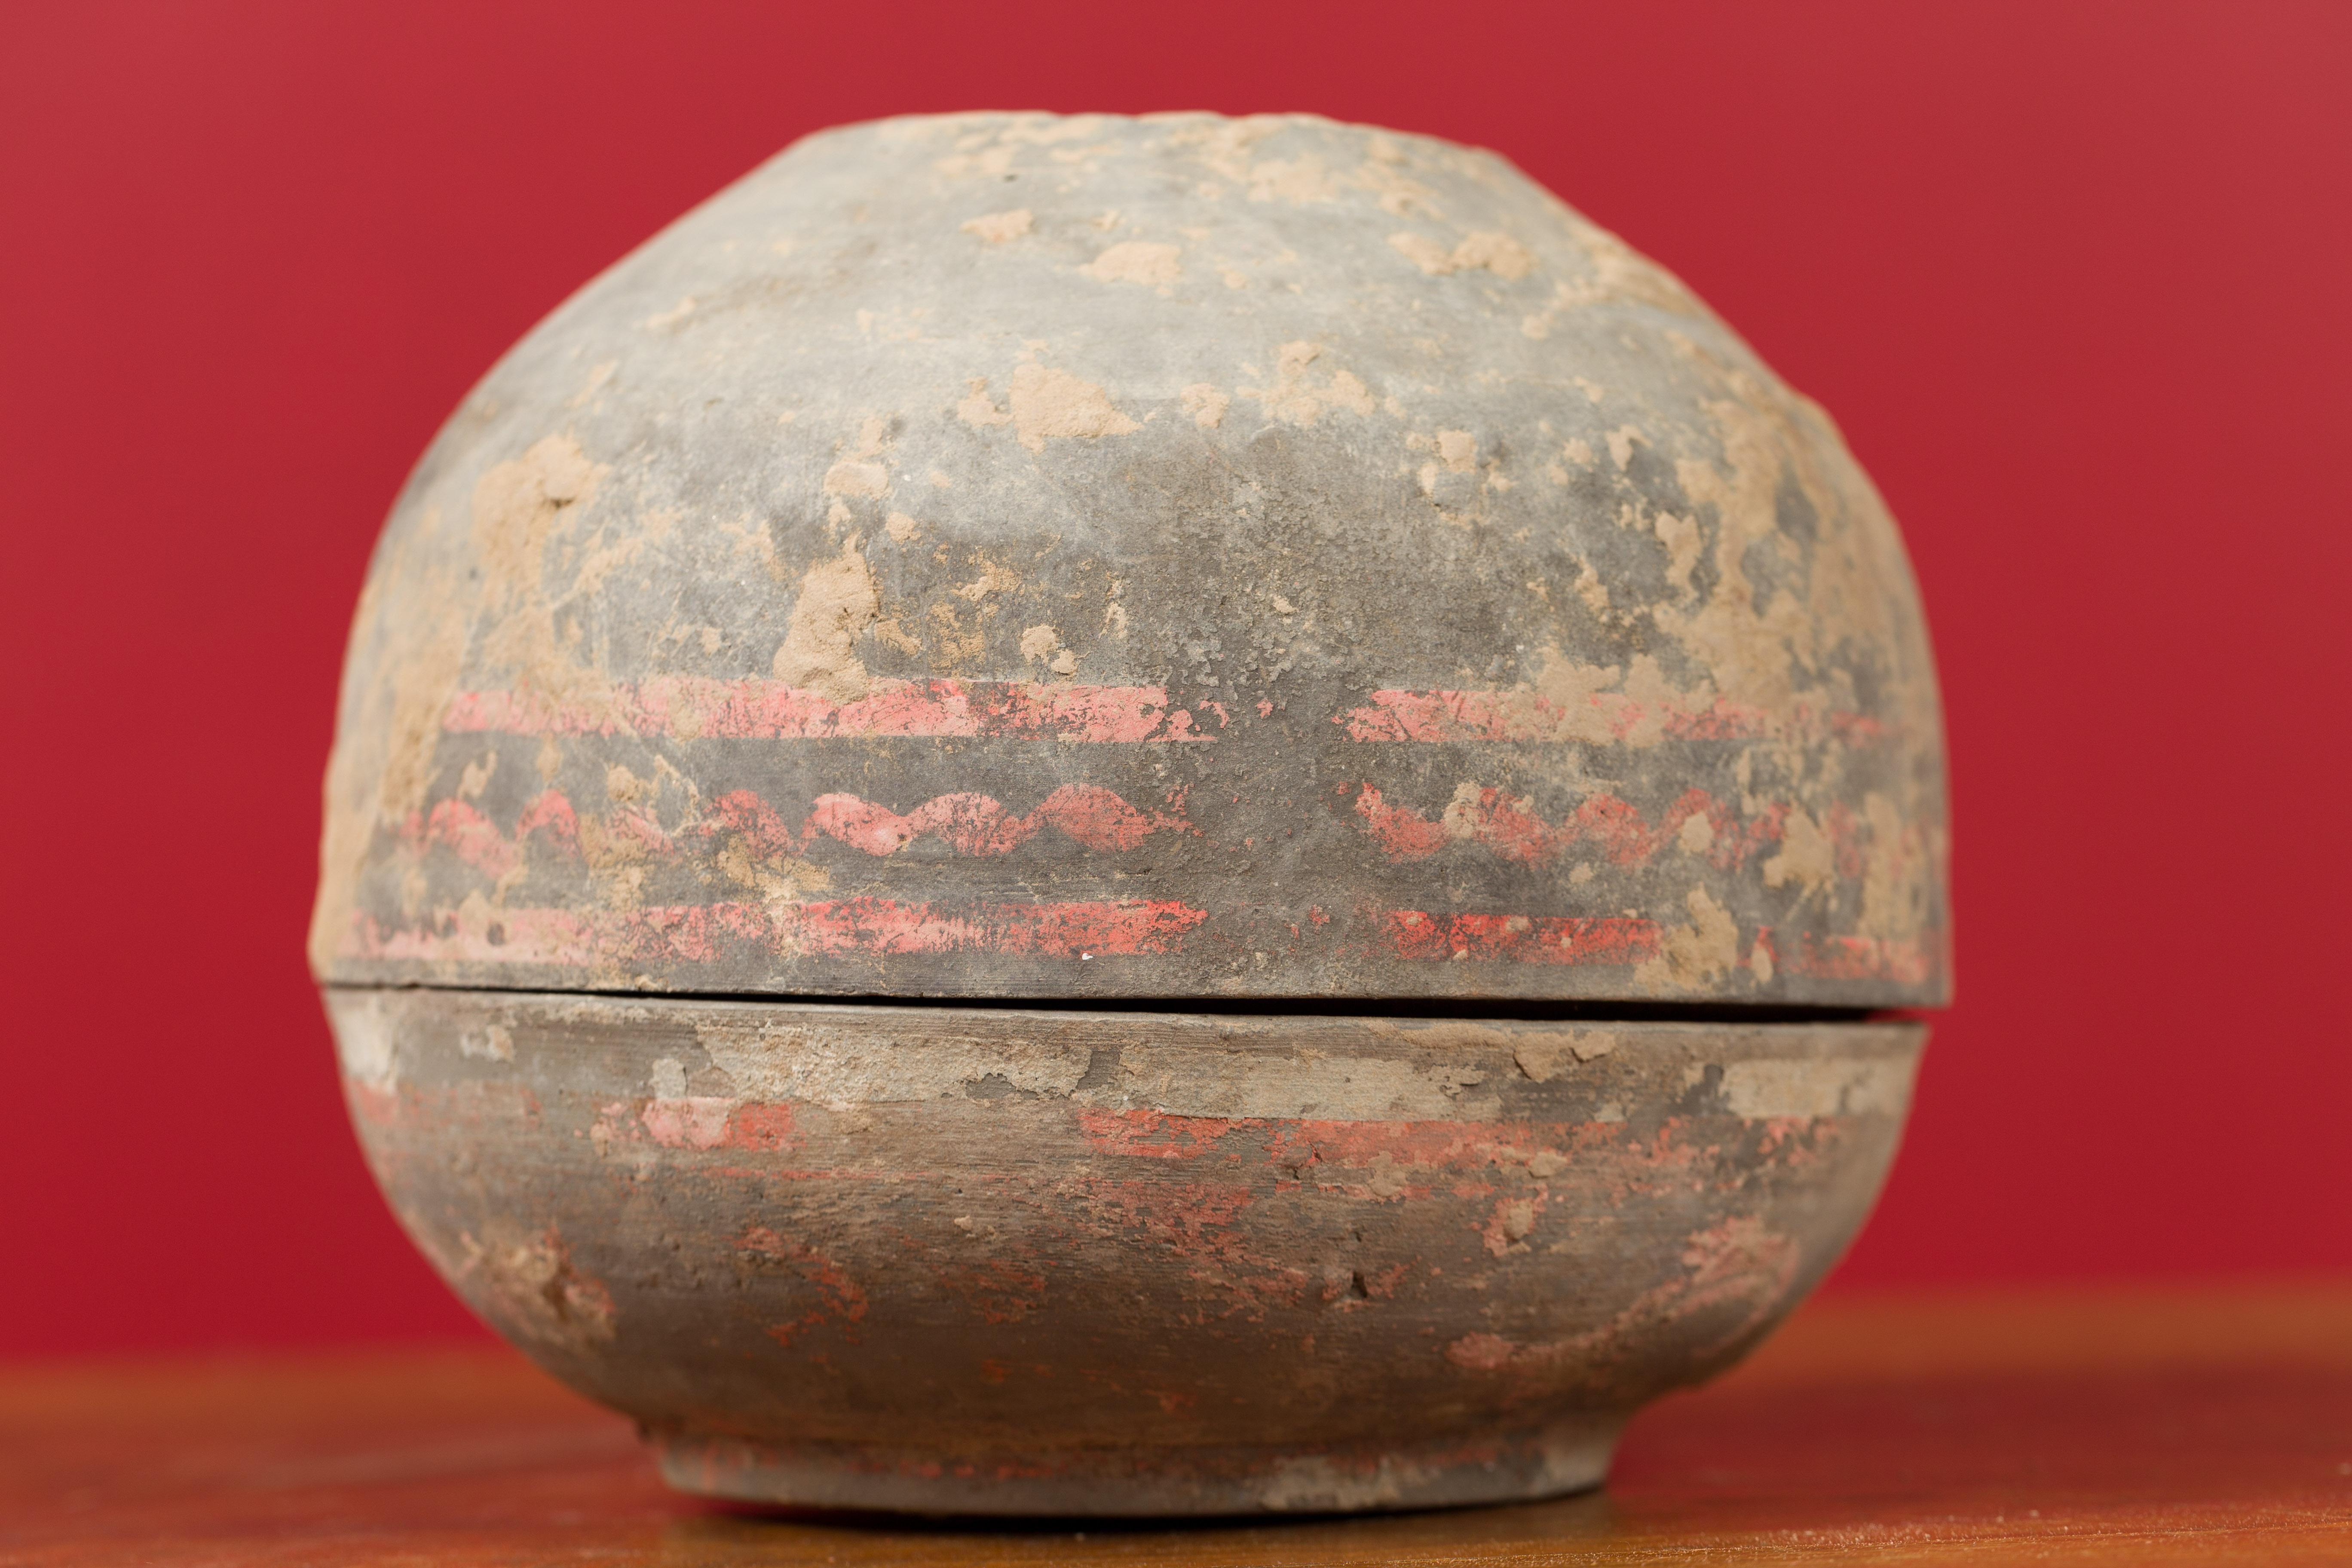 Petite Chinese Han Dynasty Lidded Vessel with Original Paint circa 202 BC-200 AD 2